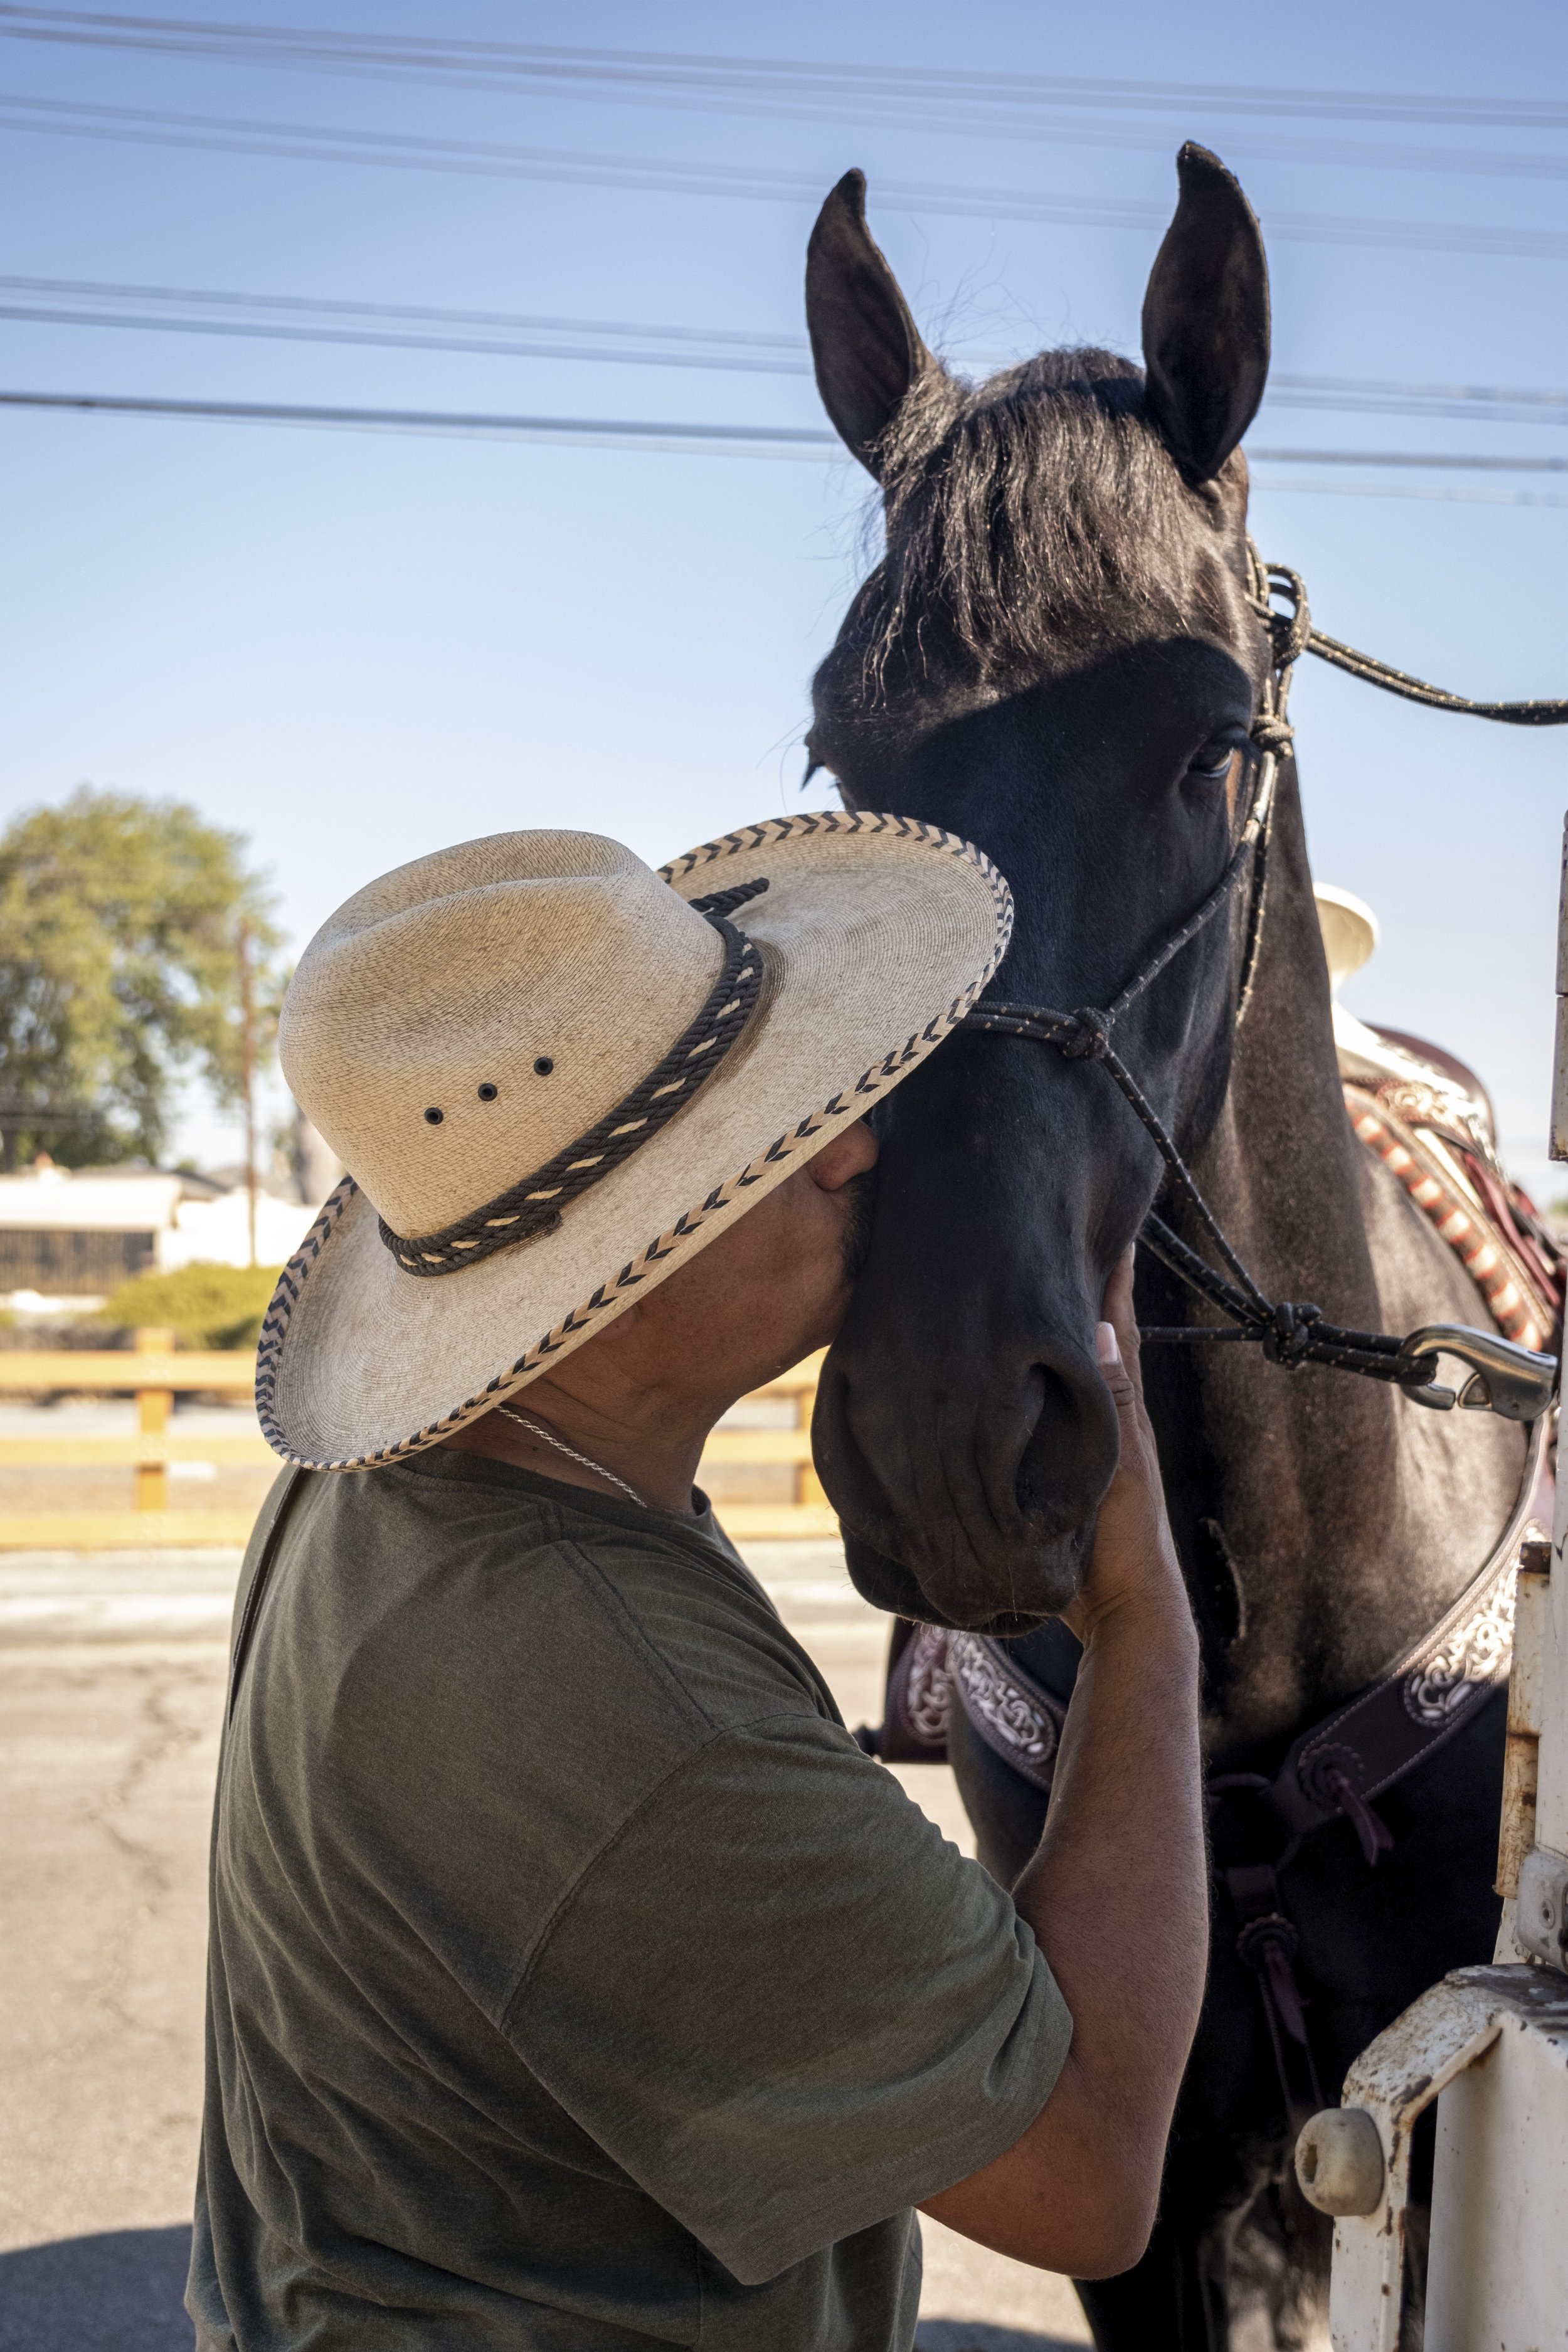  Ricardo Vasquez gives his horse Lencho a kiss. Vasquez explains that this is Lencho’s first event in Compton, Calif. on Sunday, Sept 25. (Anna Sophia Moltke | The Corsair) 